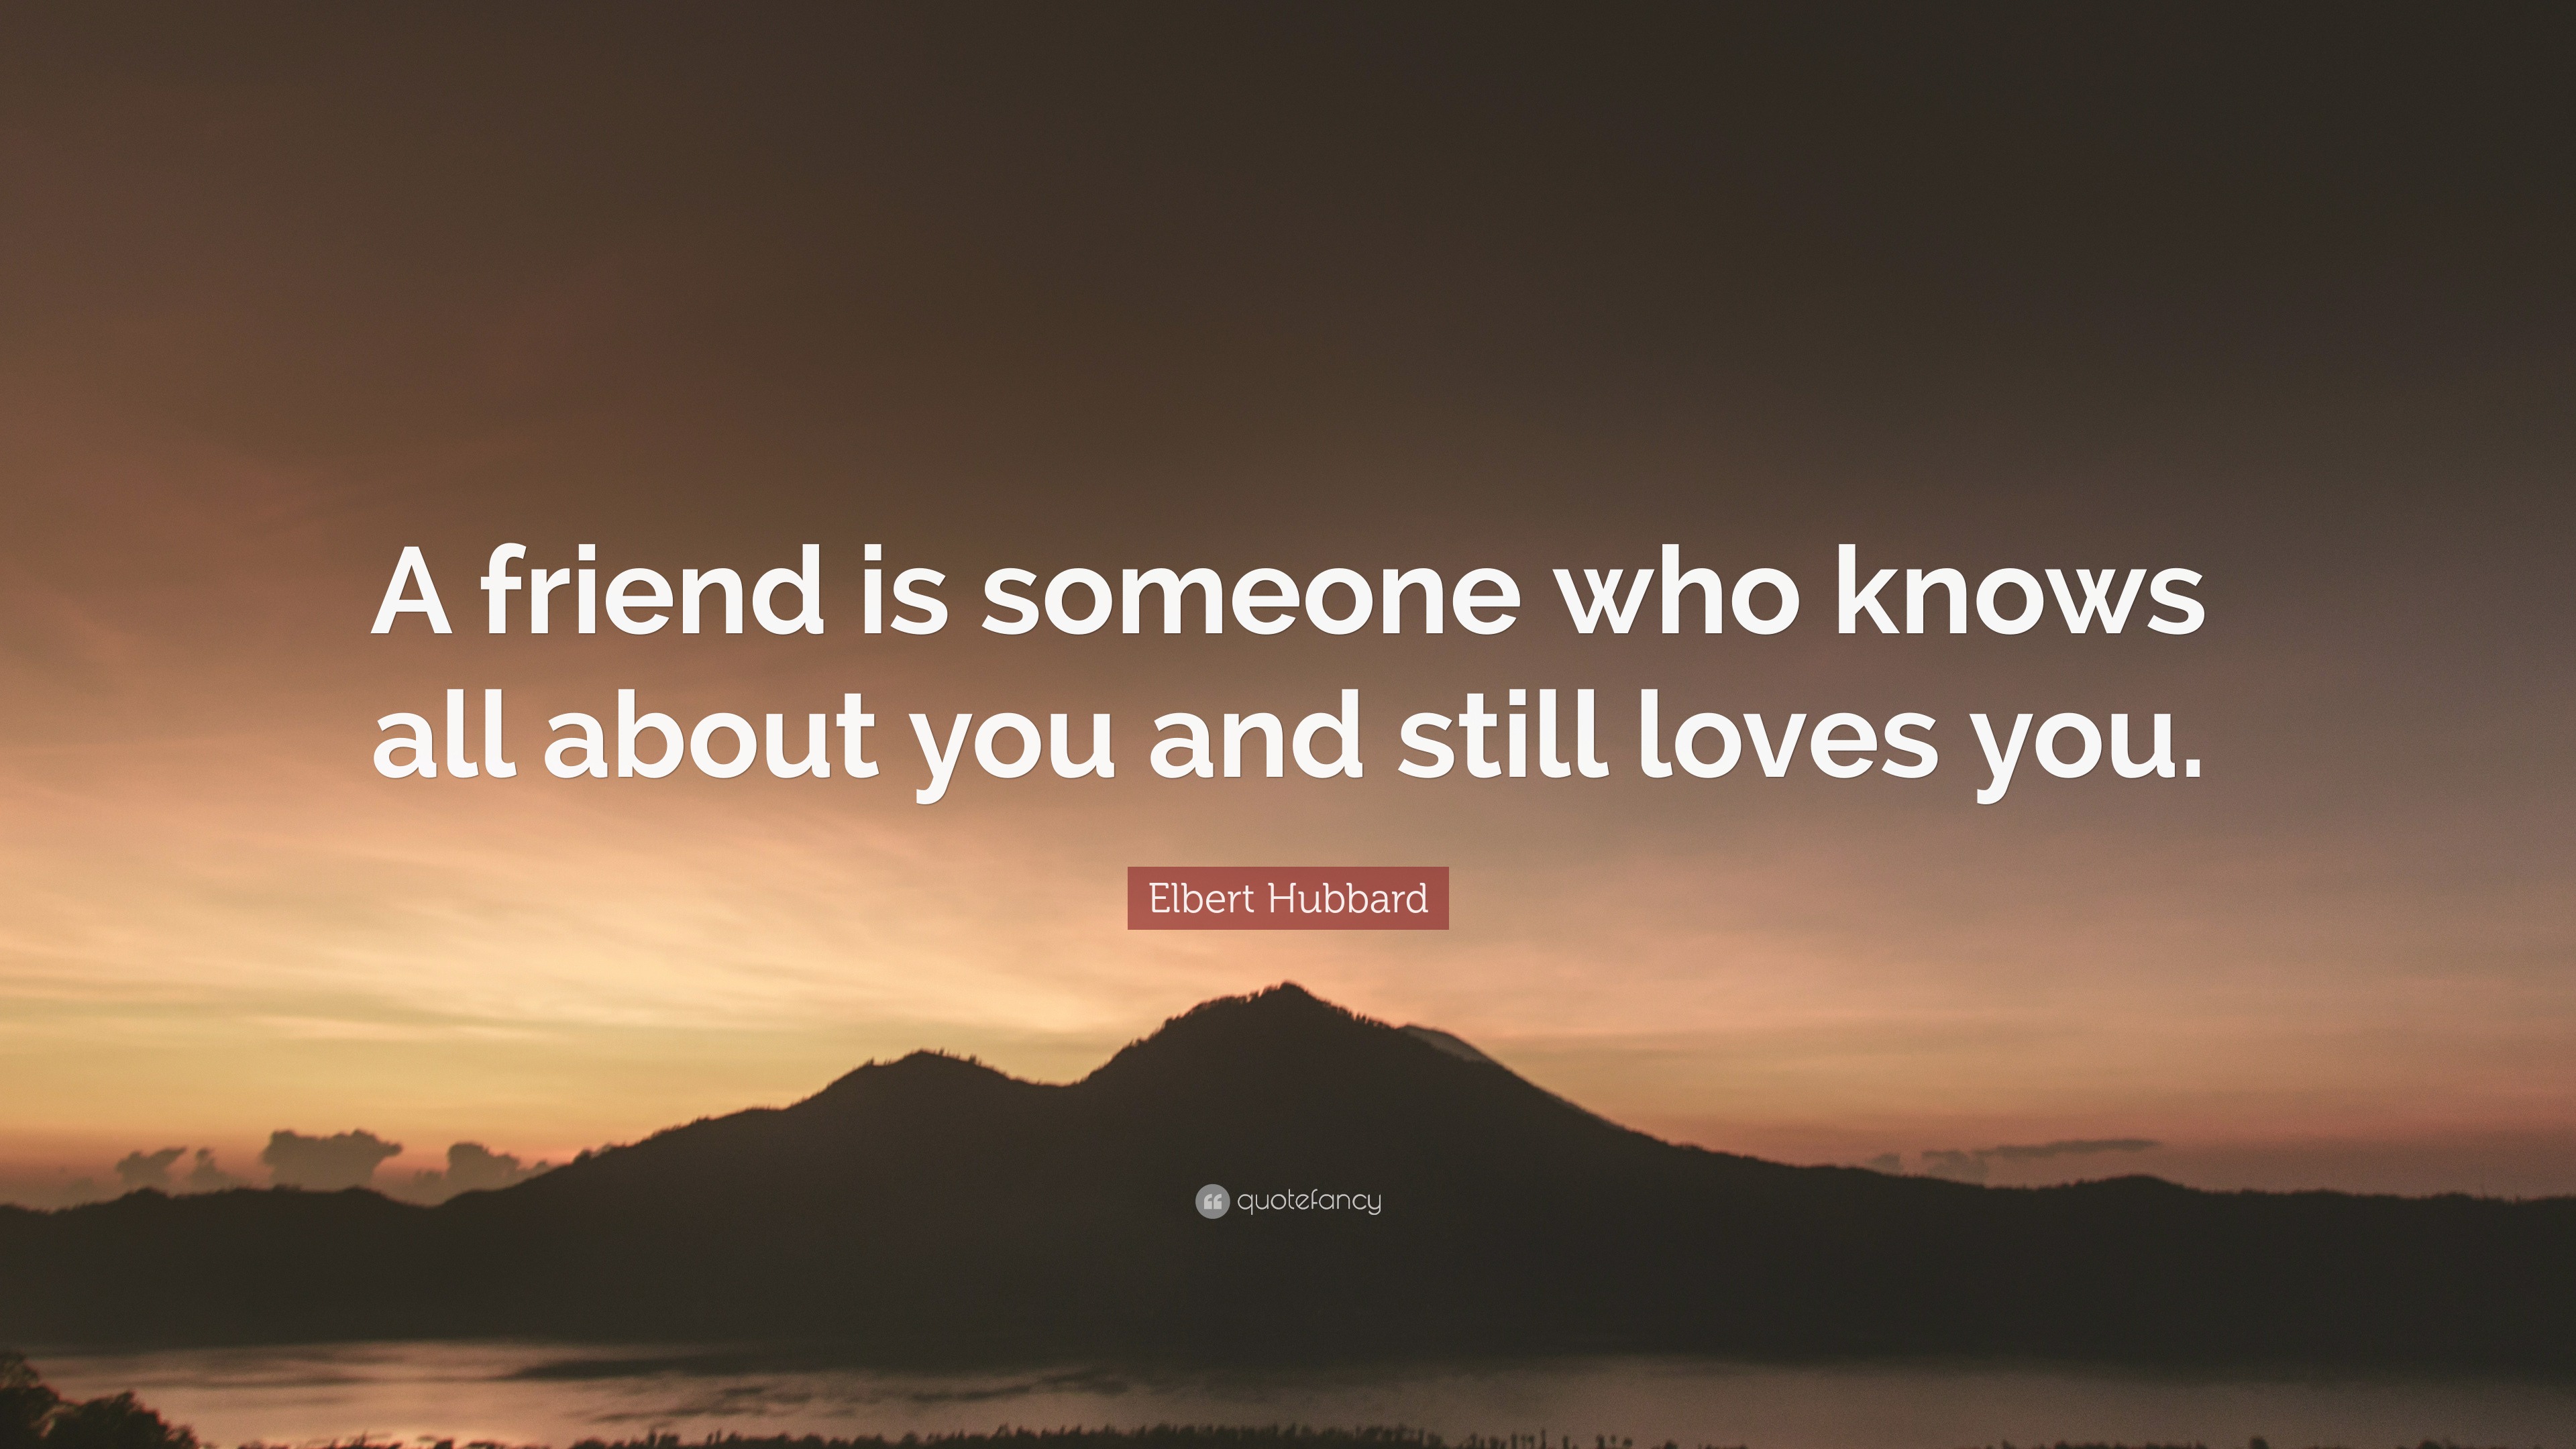 107 True Love Quotes to Form a Deeper Connection - Happier Human